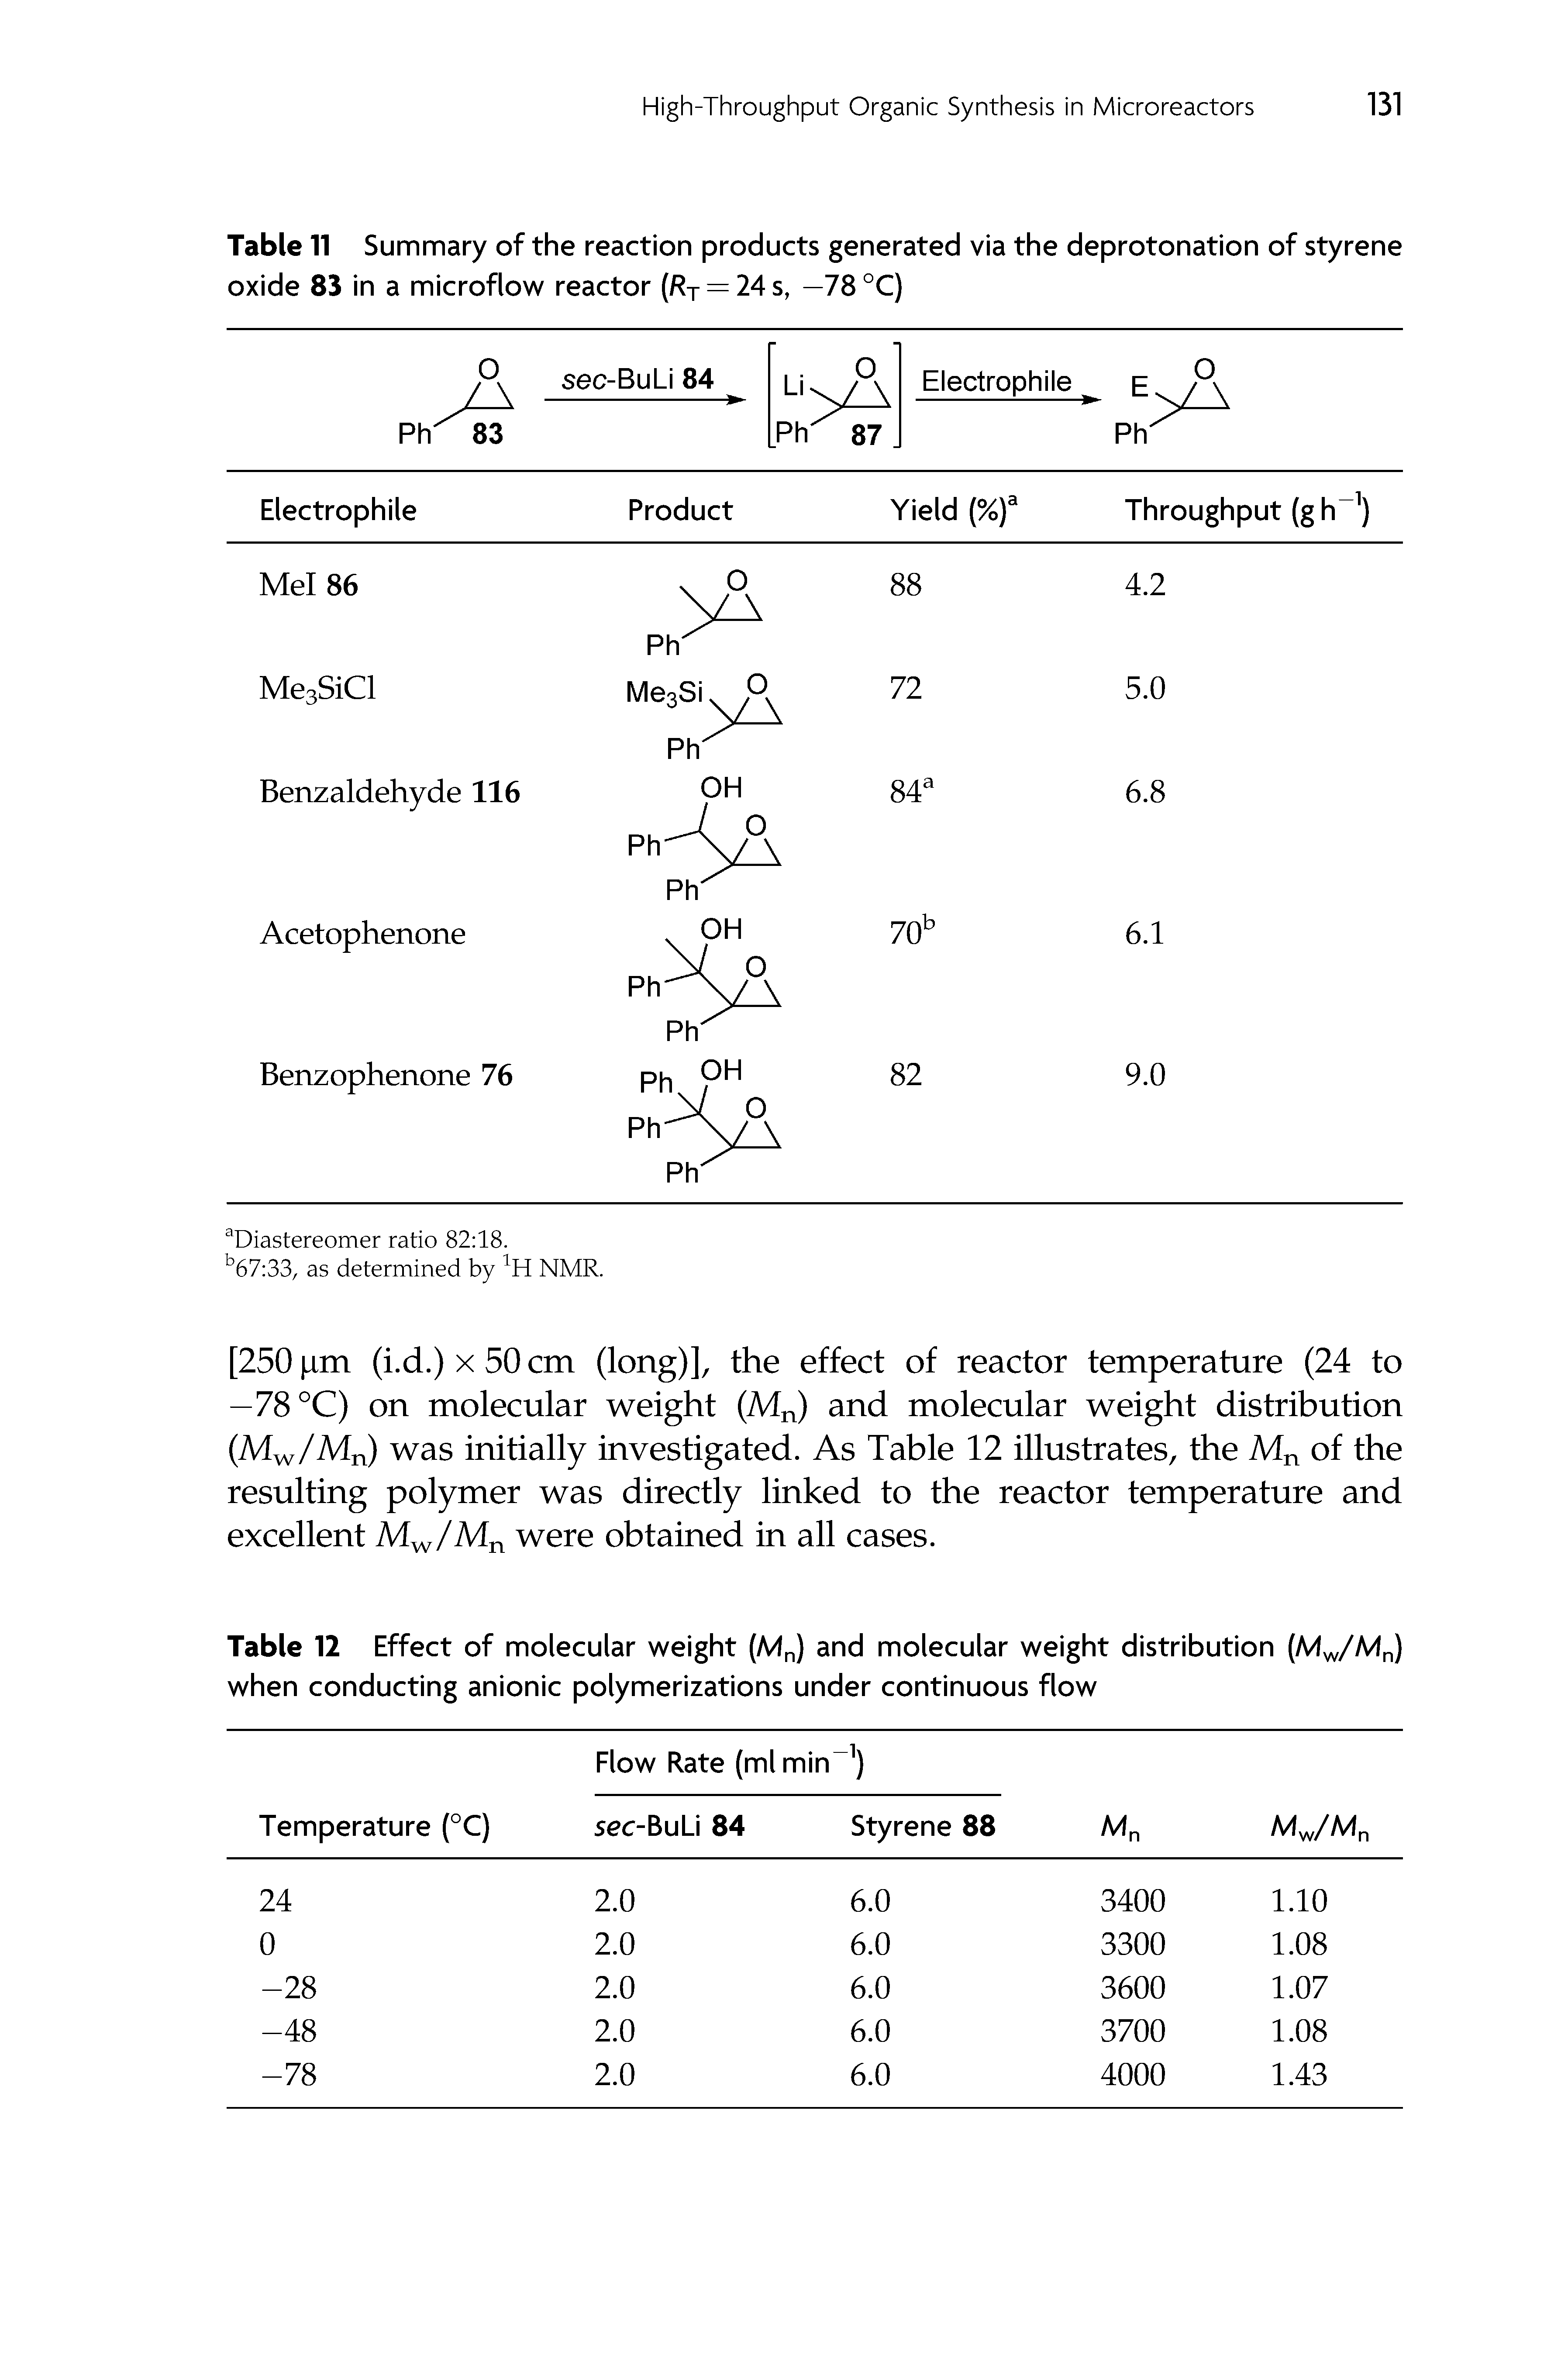 Table 12 Effect of molecular weight (Mn) and molecular weight distribution (Mw/Mn) when conducting anionic polymerizations under continuous flow...